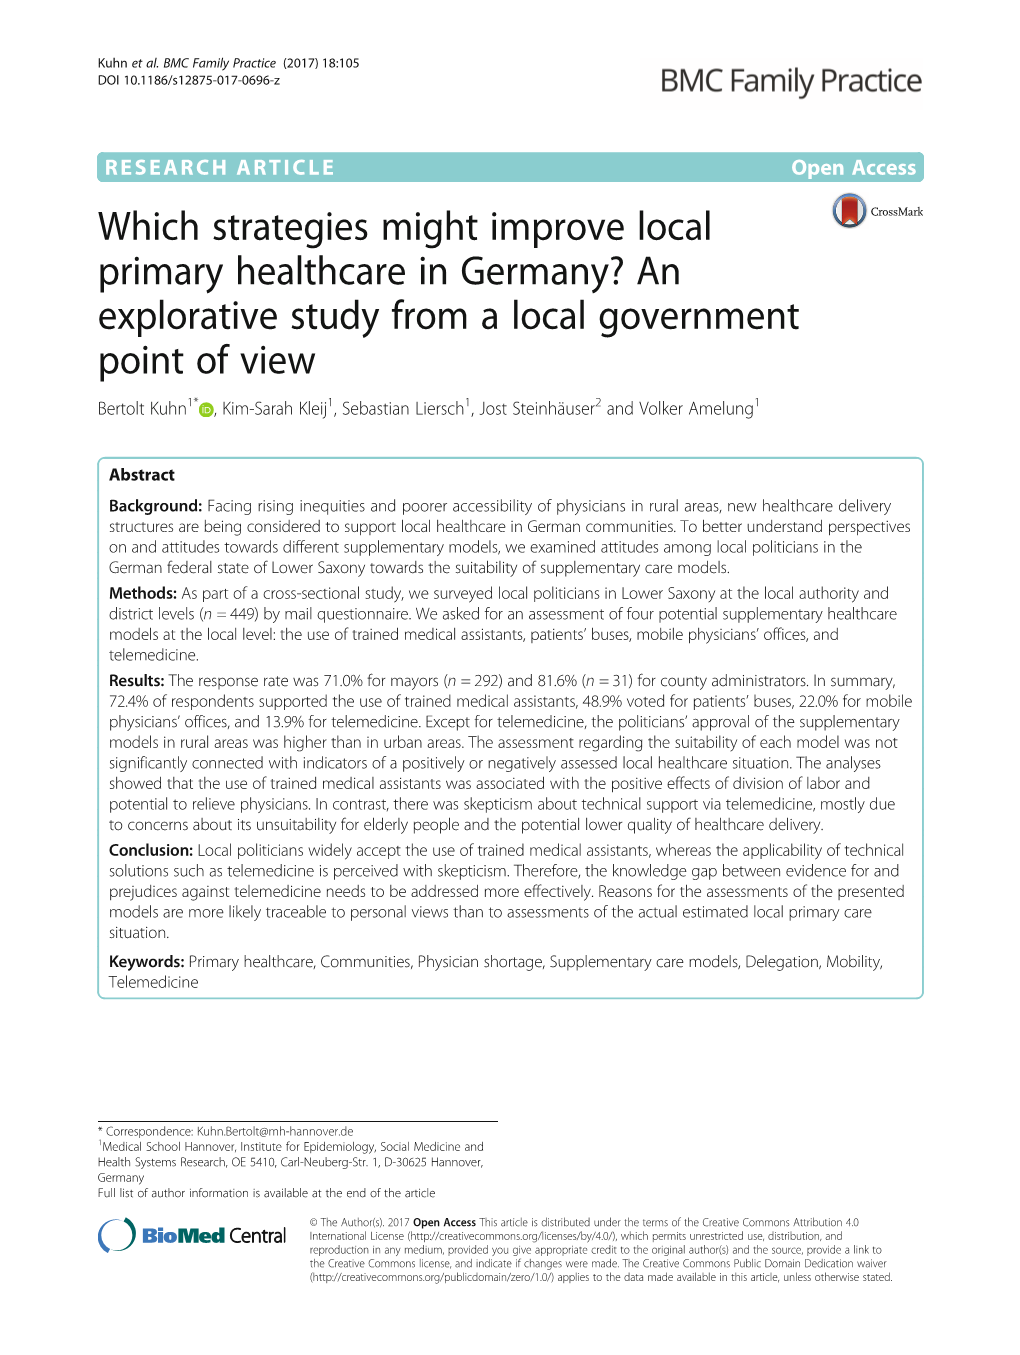 Which Strategies Might Improve Local Primary Healthcare